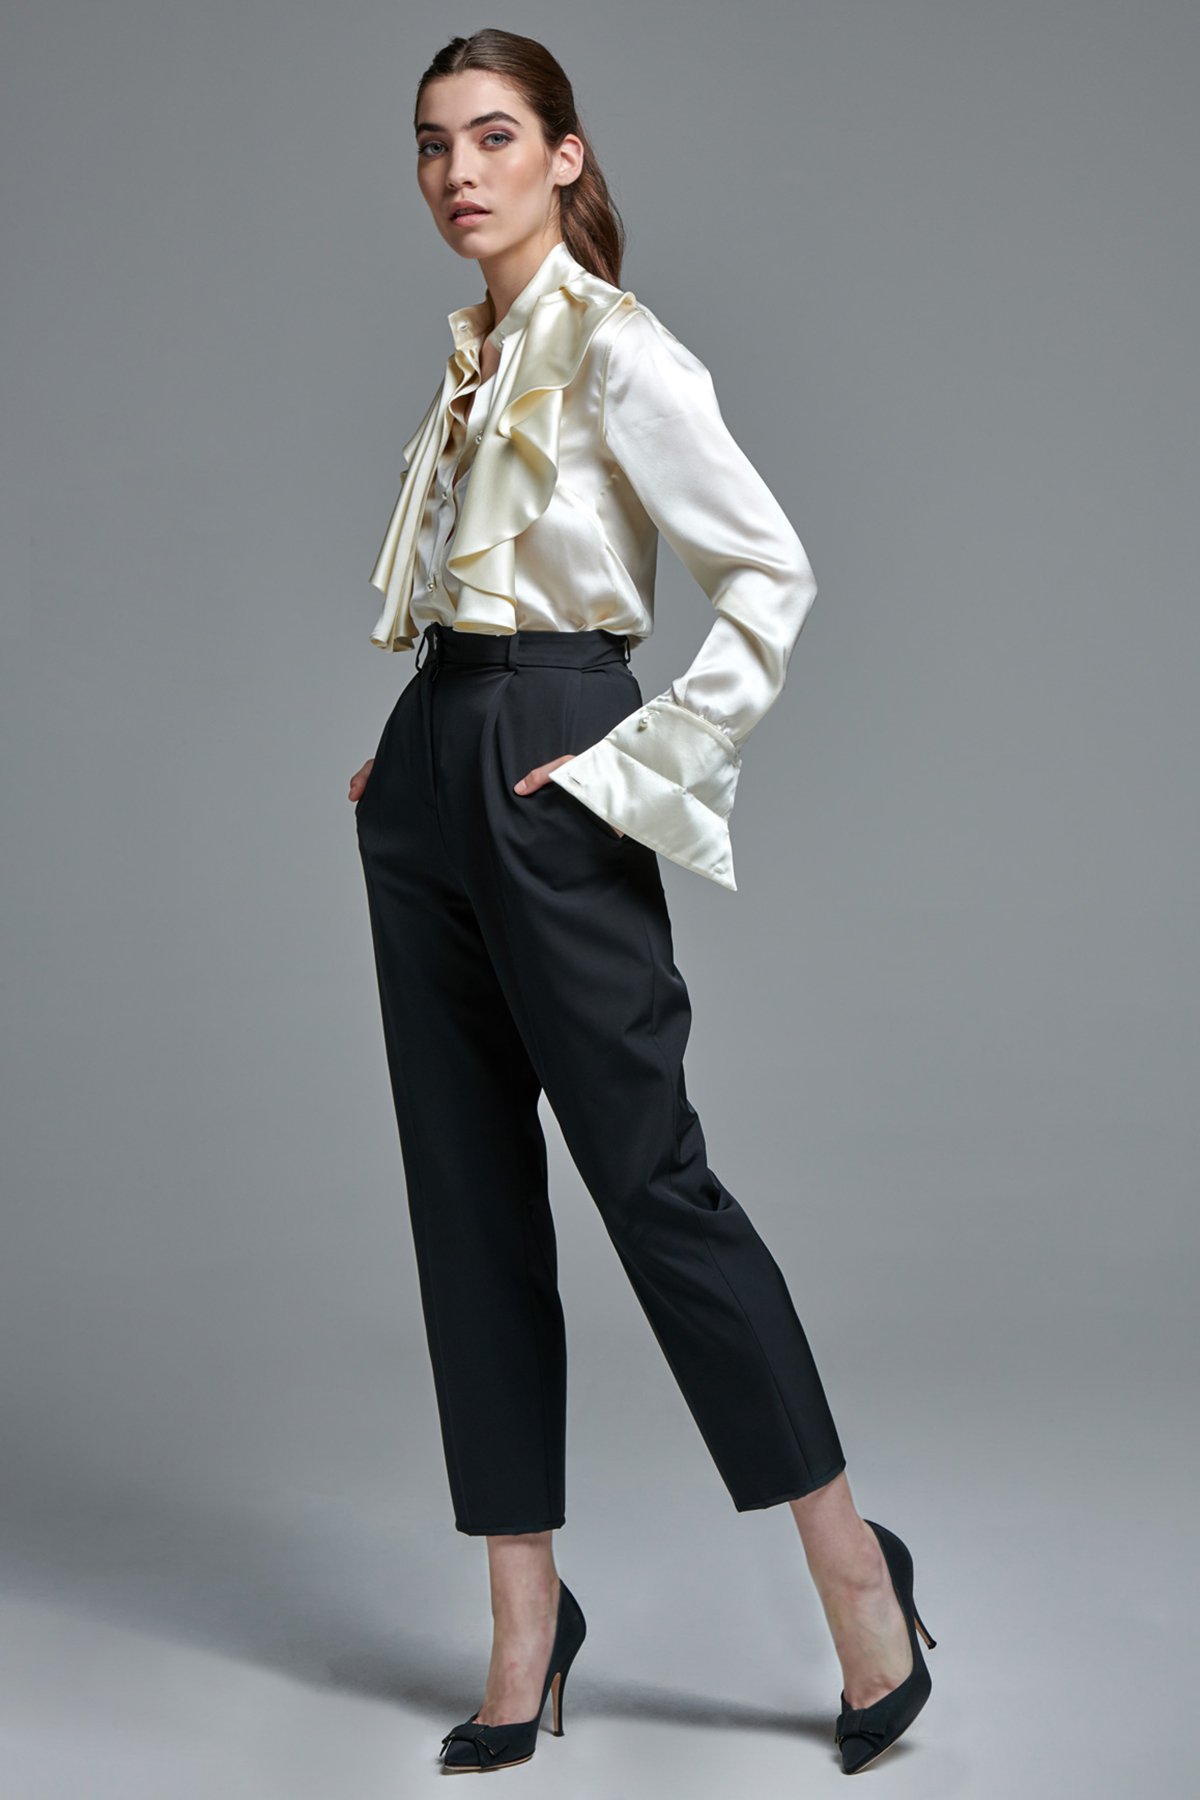 Ankle Grazer Trousers - The full D.N.A collection - YARDEN MITRANI